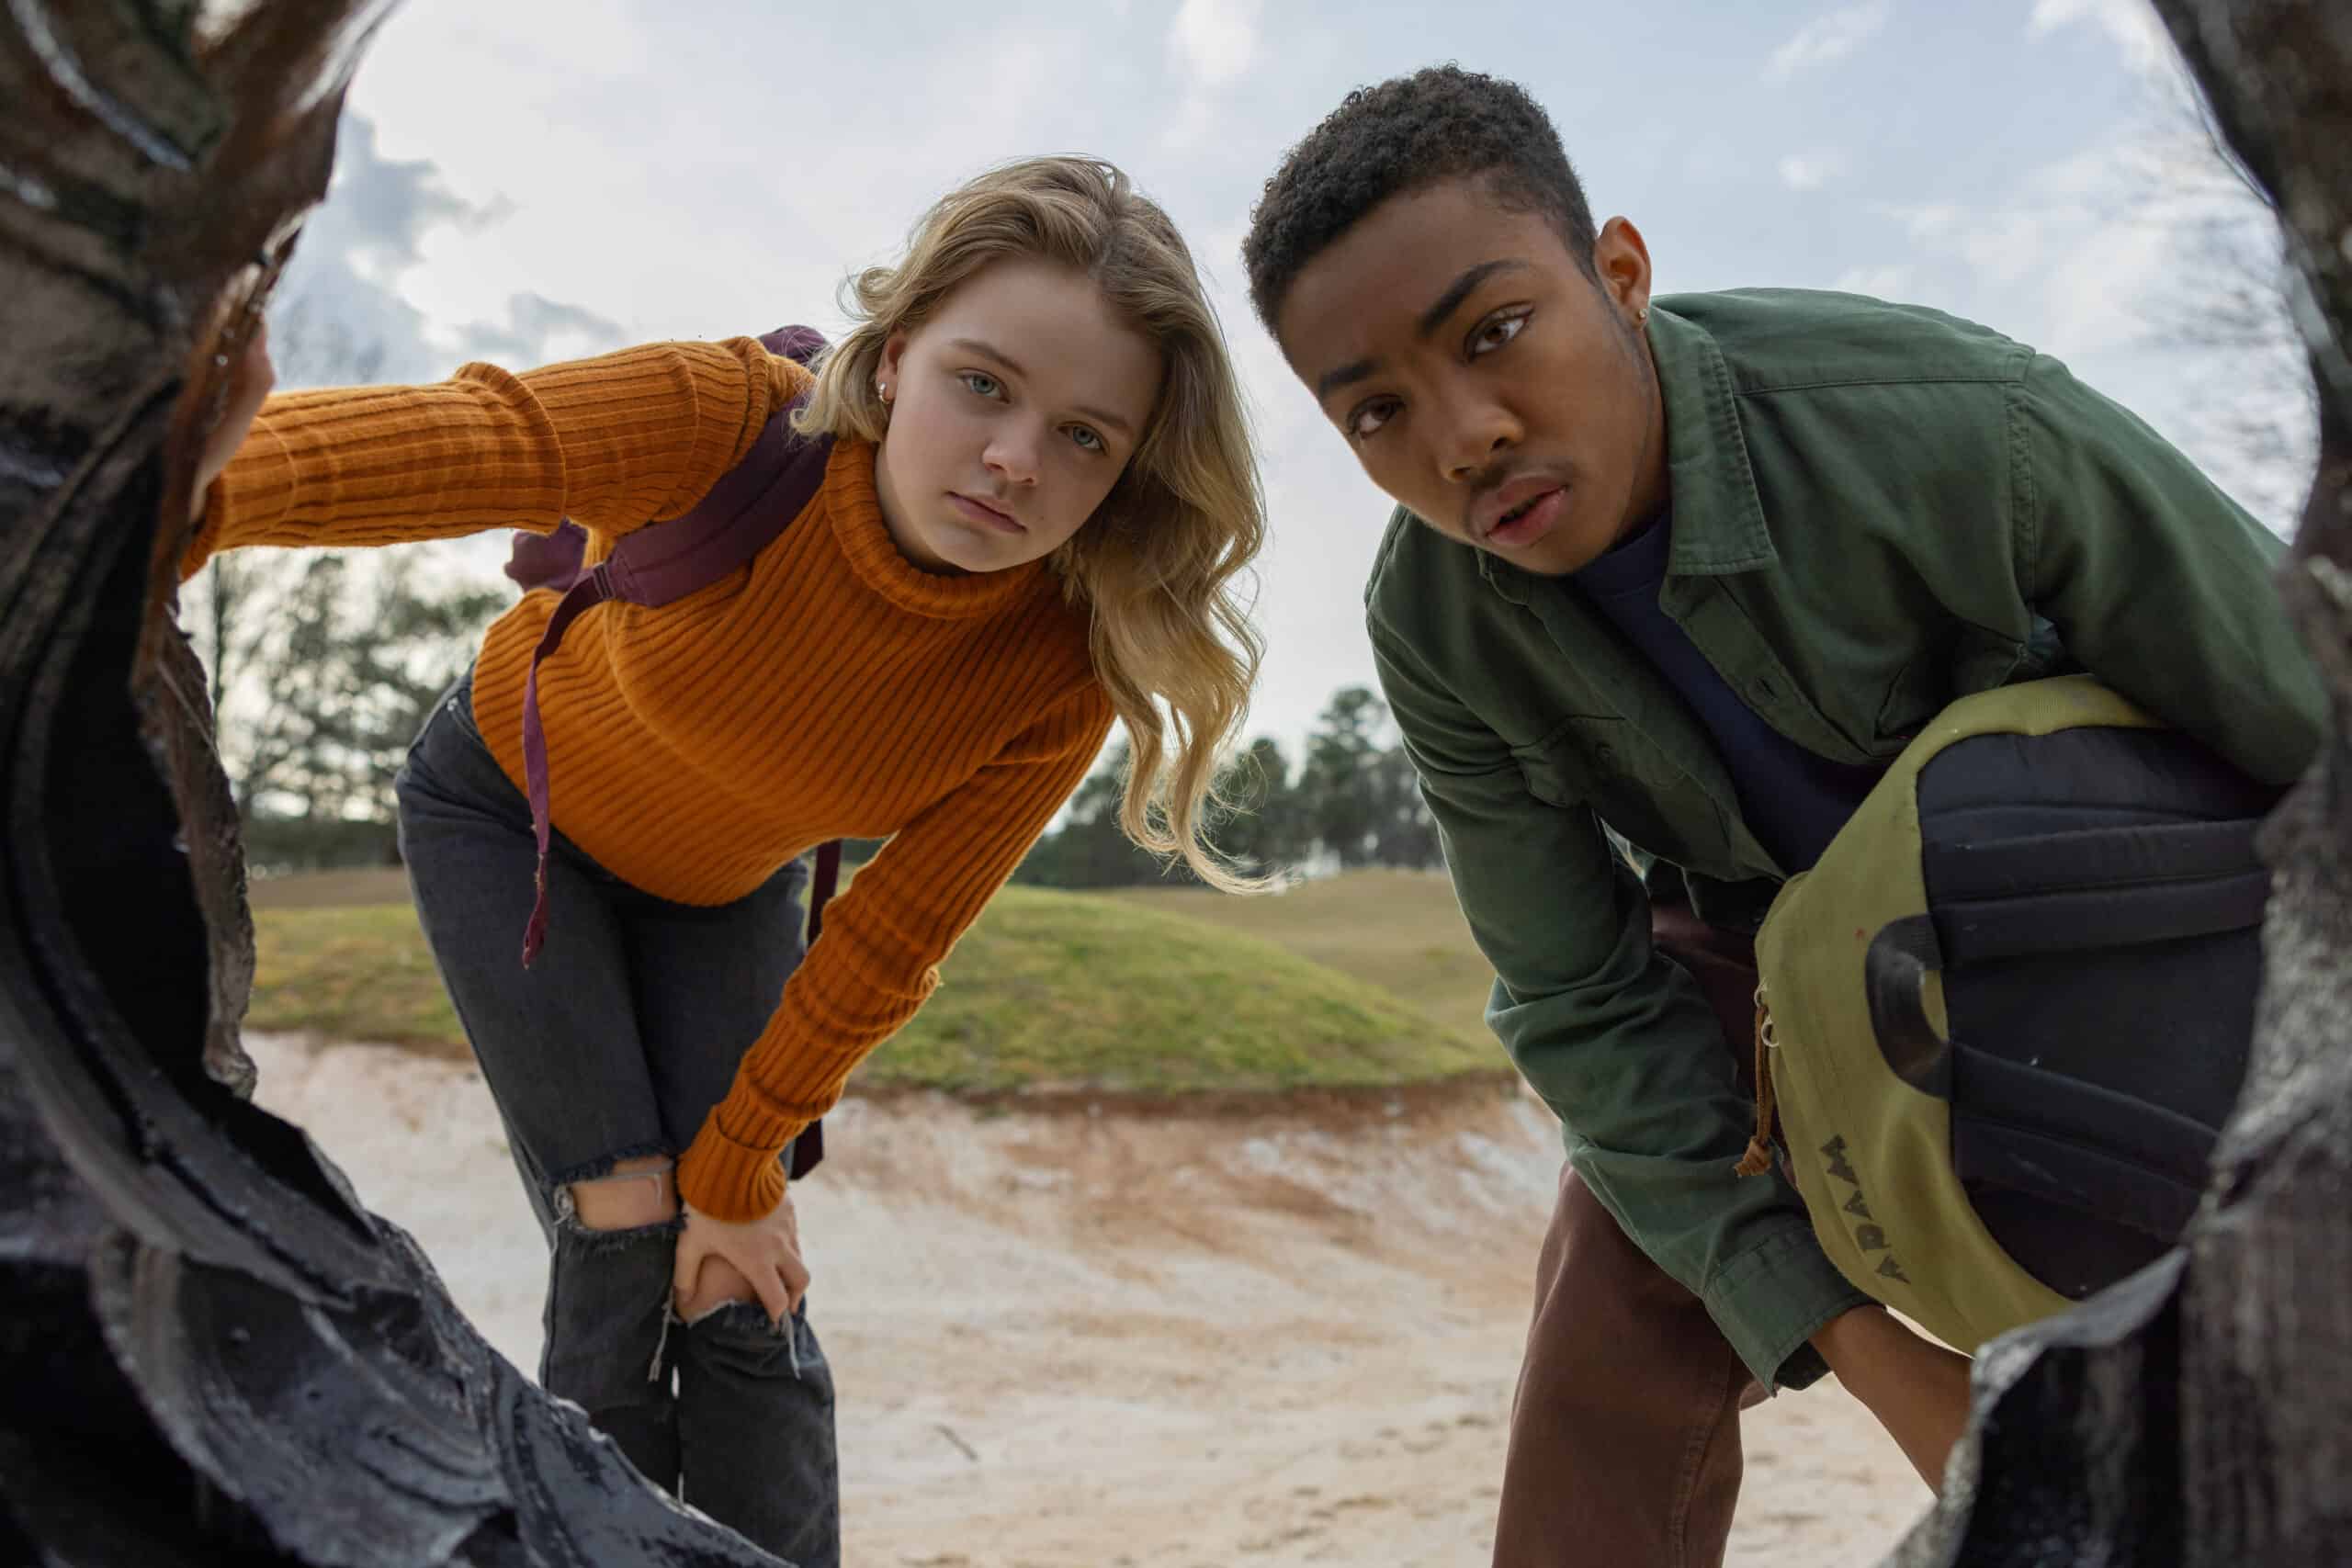 Chloe (Kylie Rogers) and Adam (Asante Blackk) looking down a hole which is the entrance to a Vuvv's home